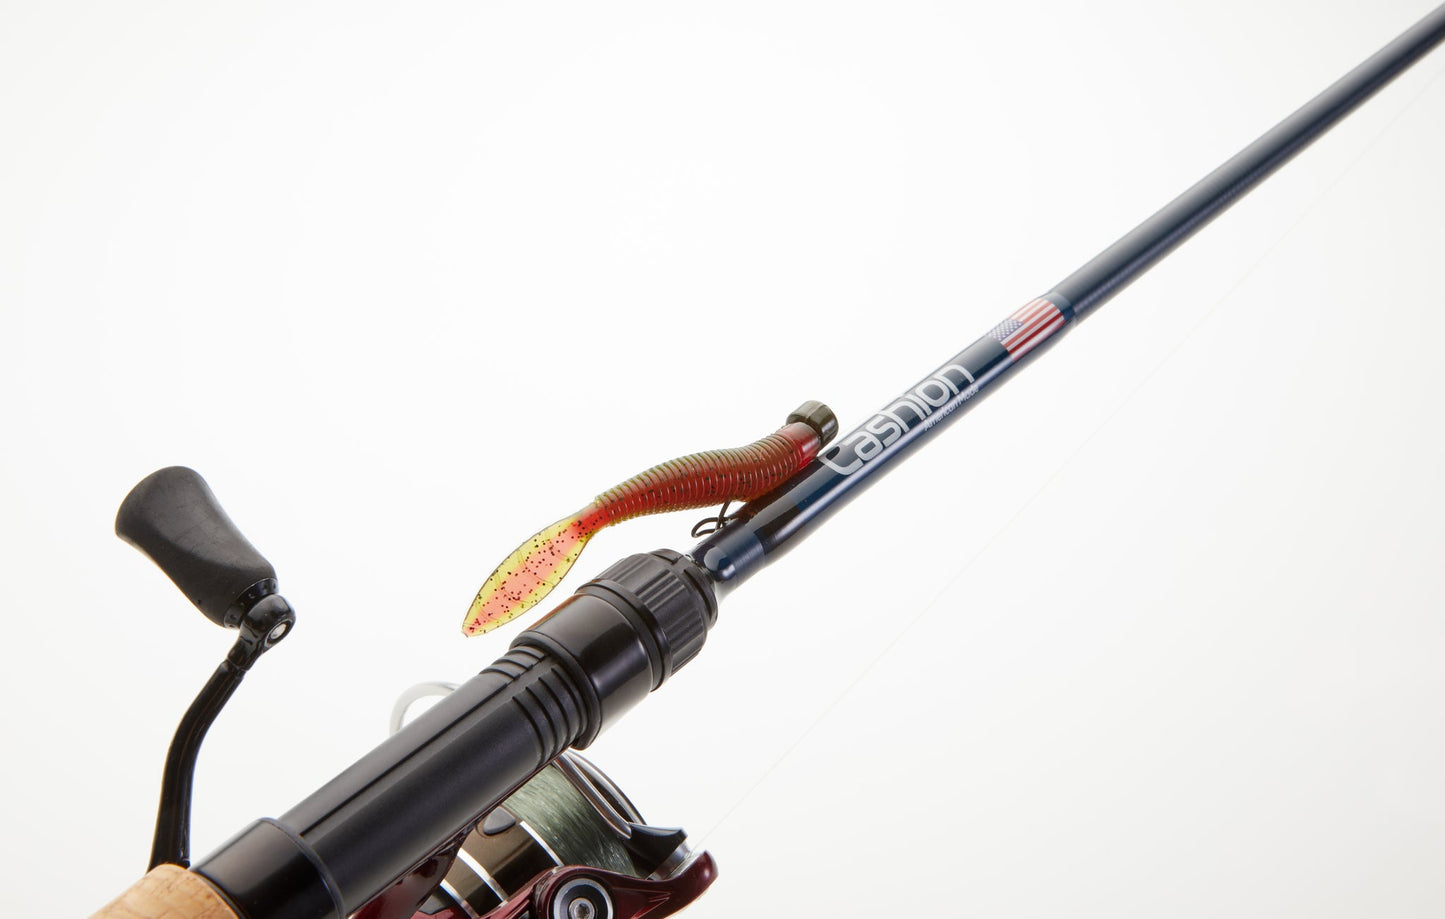 Element Ned Rig Rod - One Stop Bait Shop